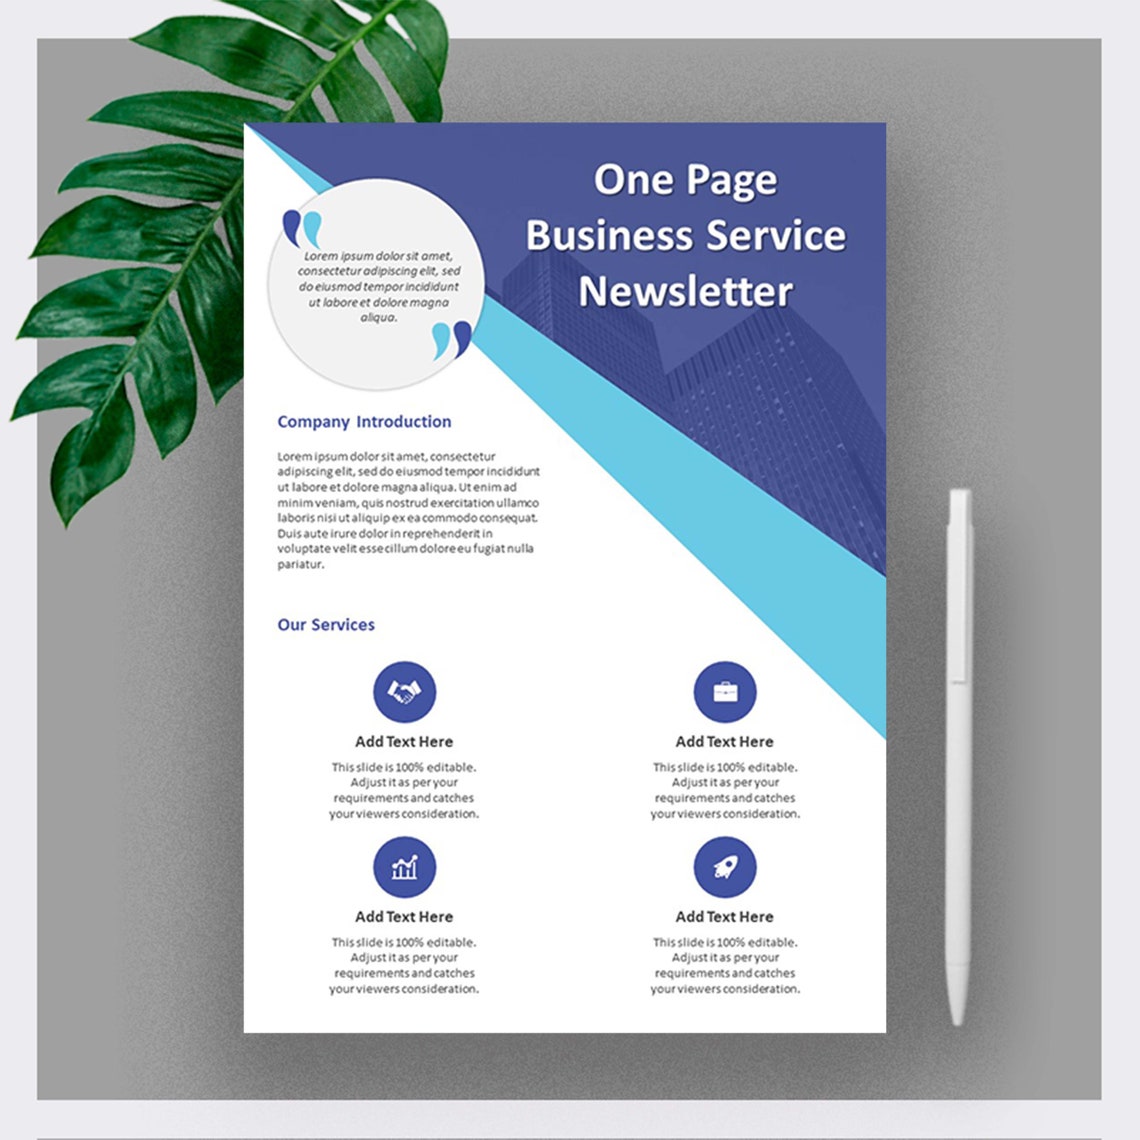 An image of a gorgeous business service newsletter presentation slide template.